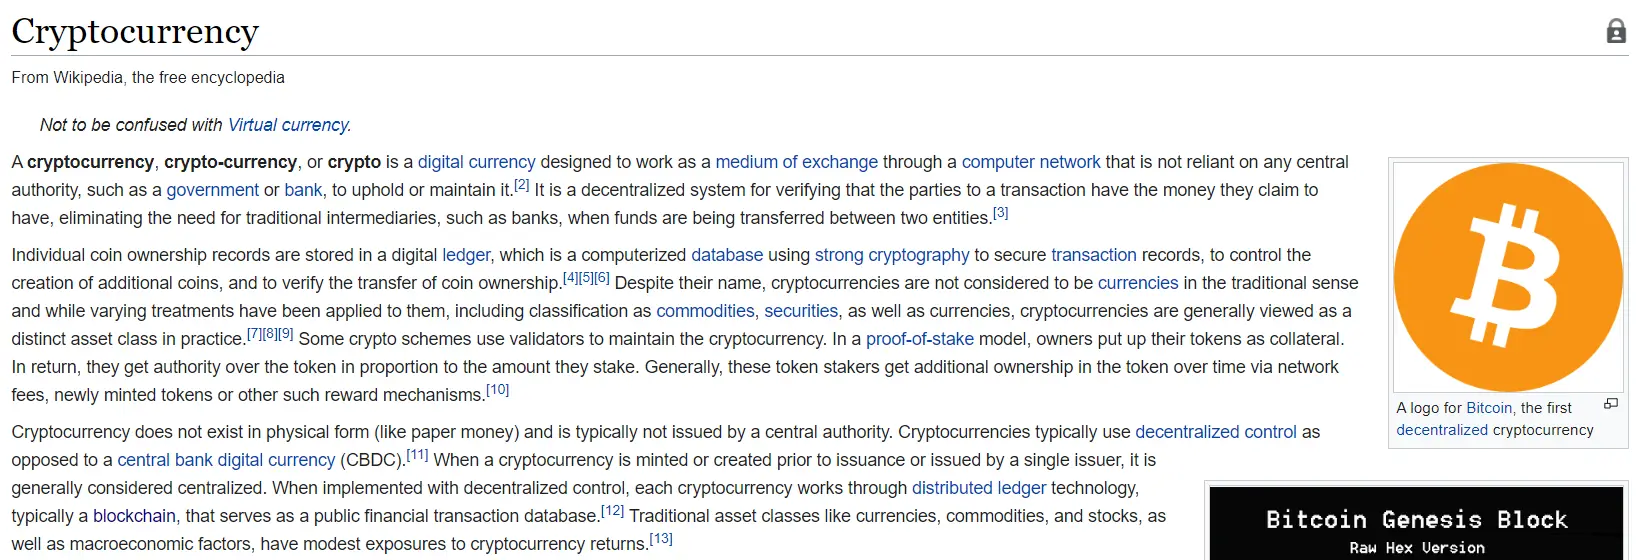 Cryptocurrency definition: Wikipedia